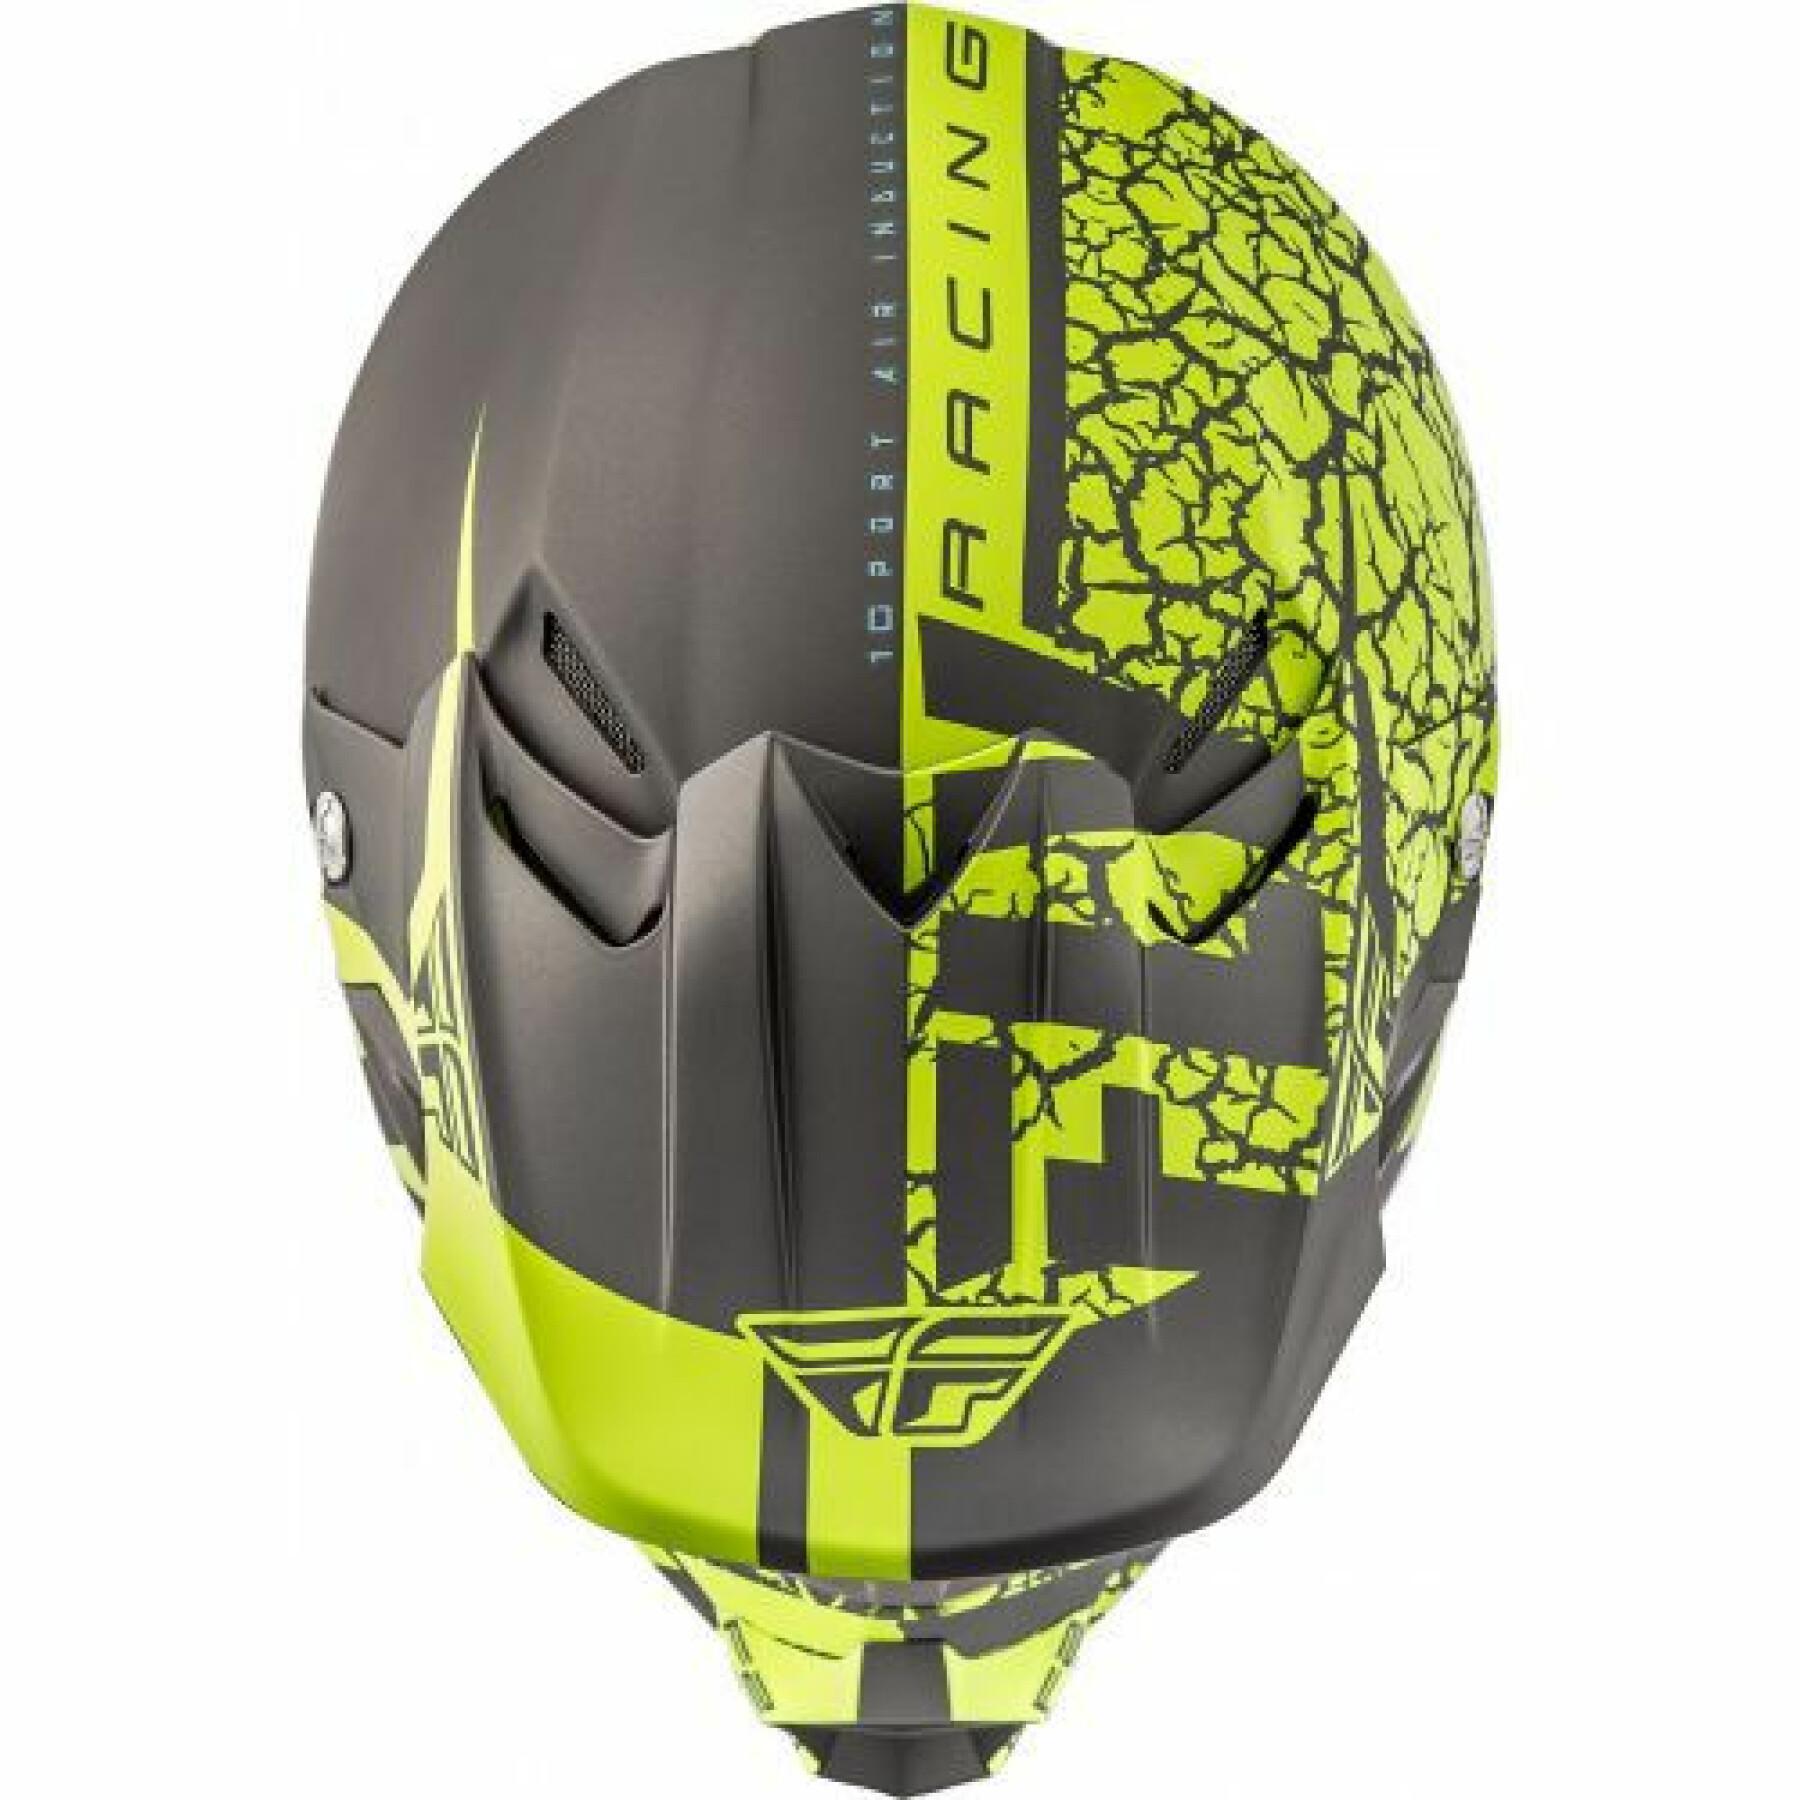 Casque Fly Racing F2 Carbon Fracture 2018